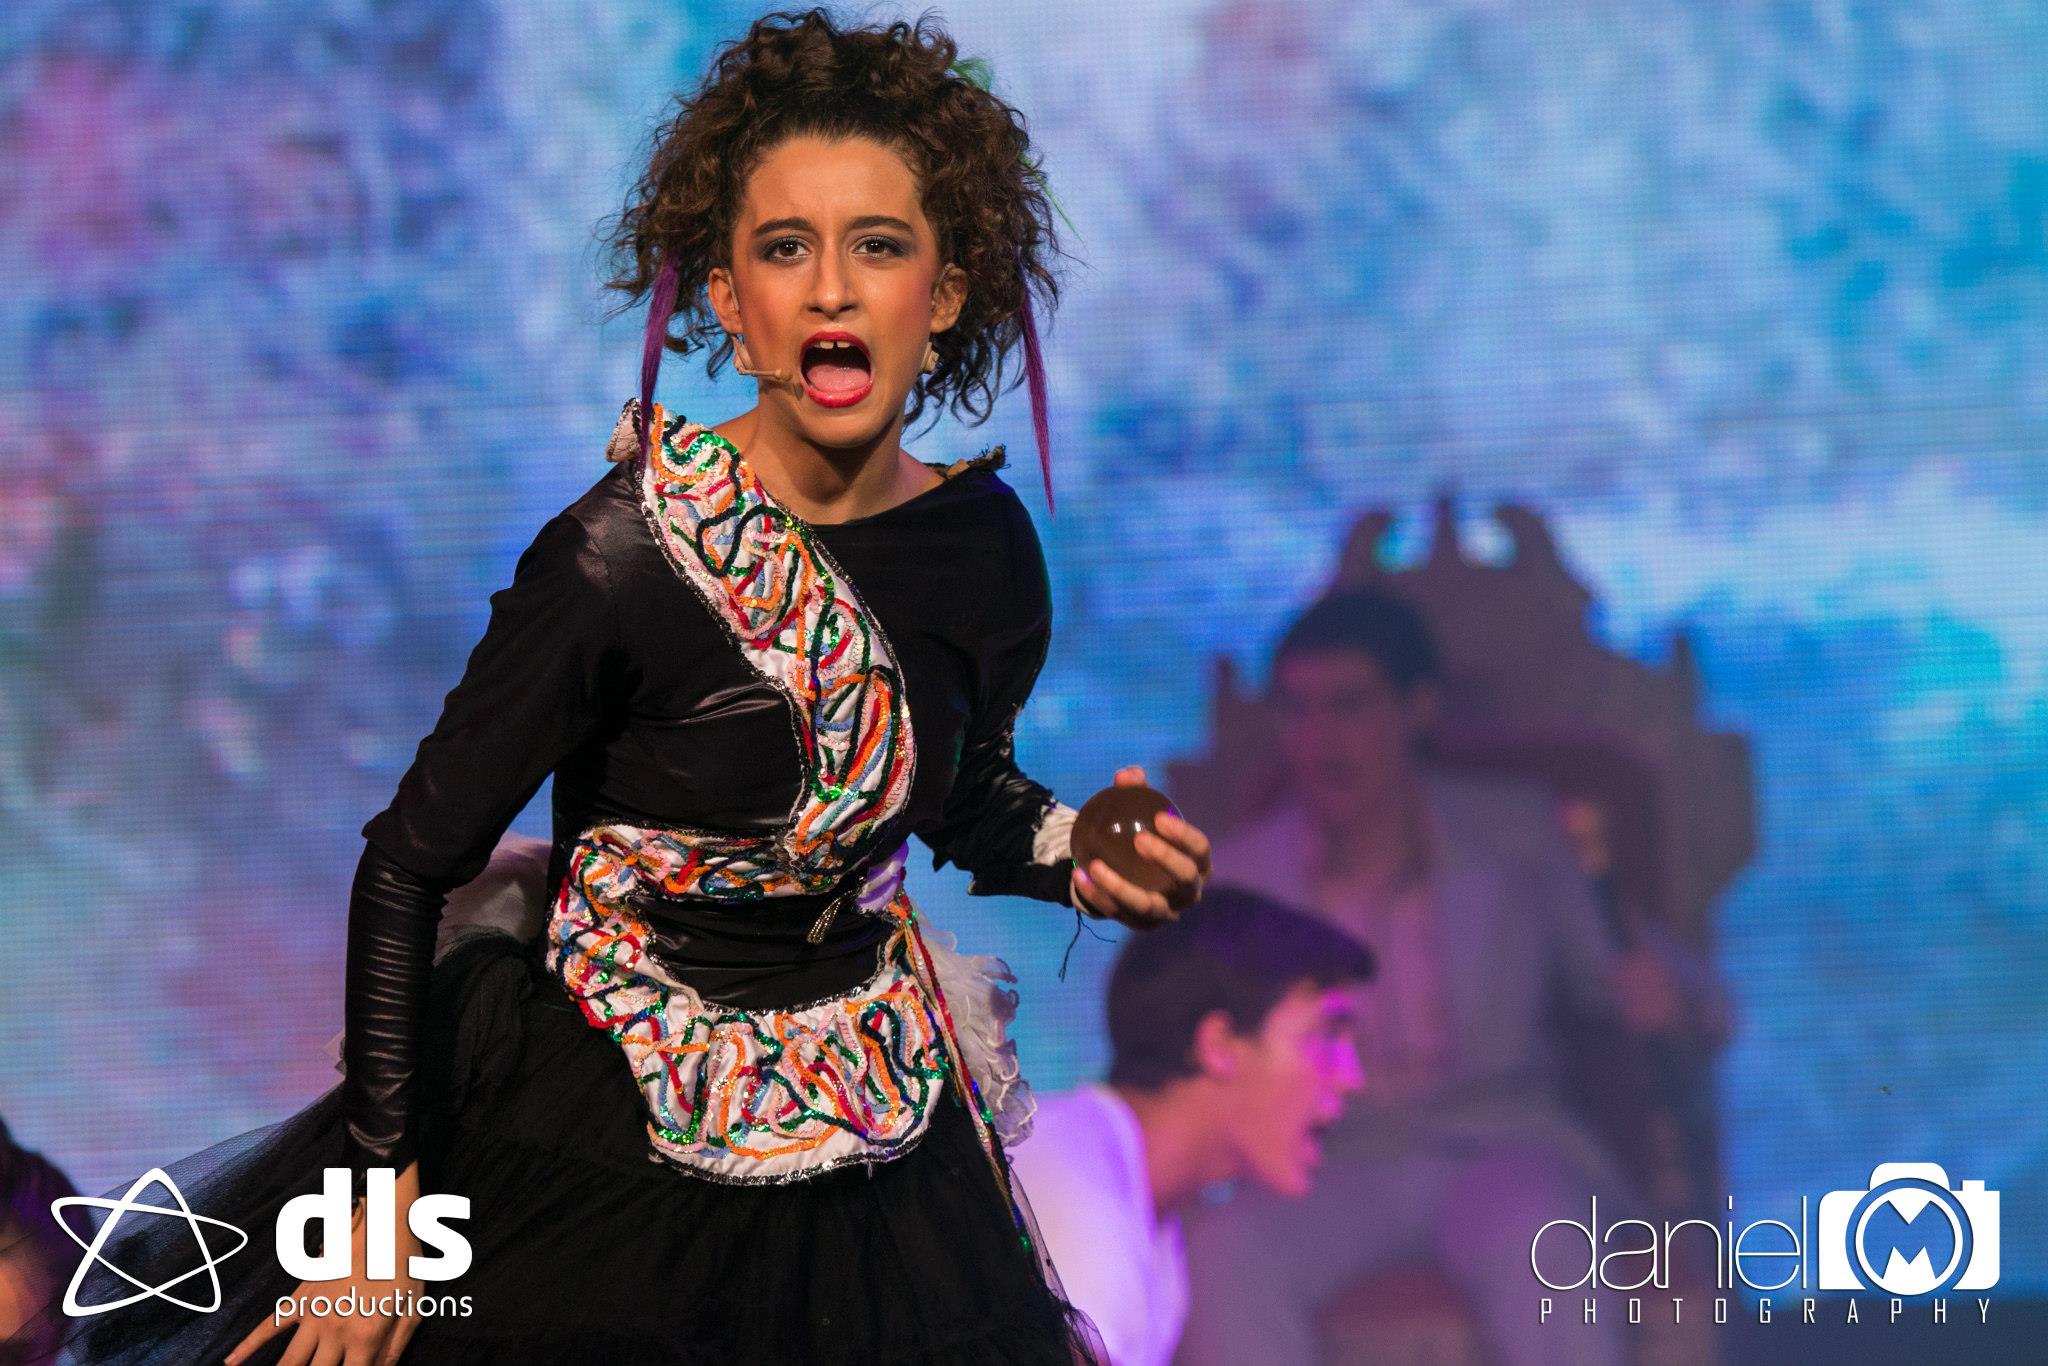 Sarkky Cutter from DLS Productions staging of Dazzle in Malta